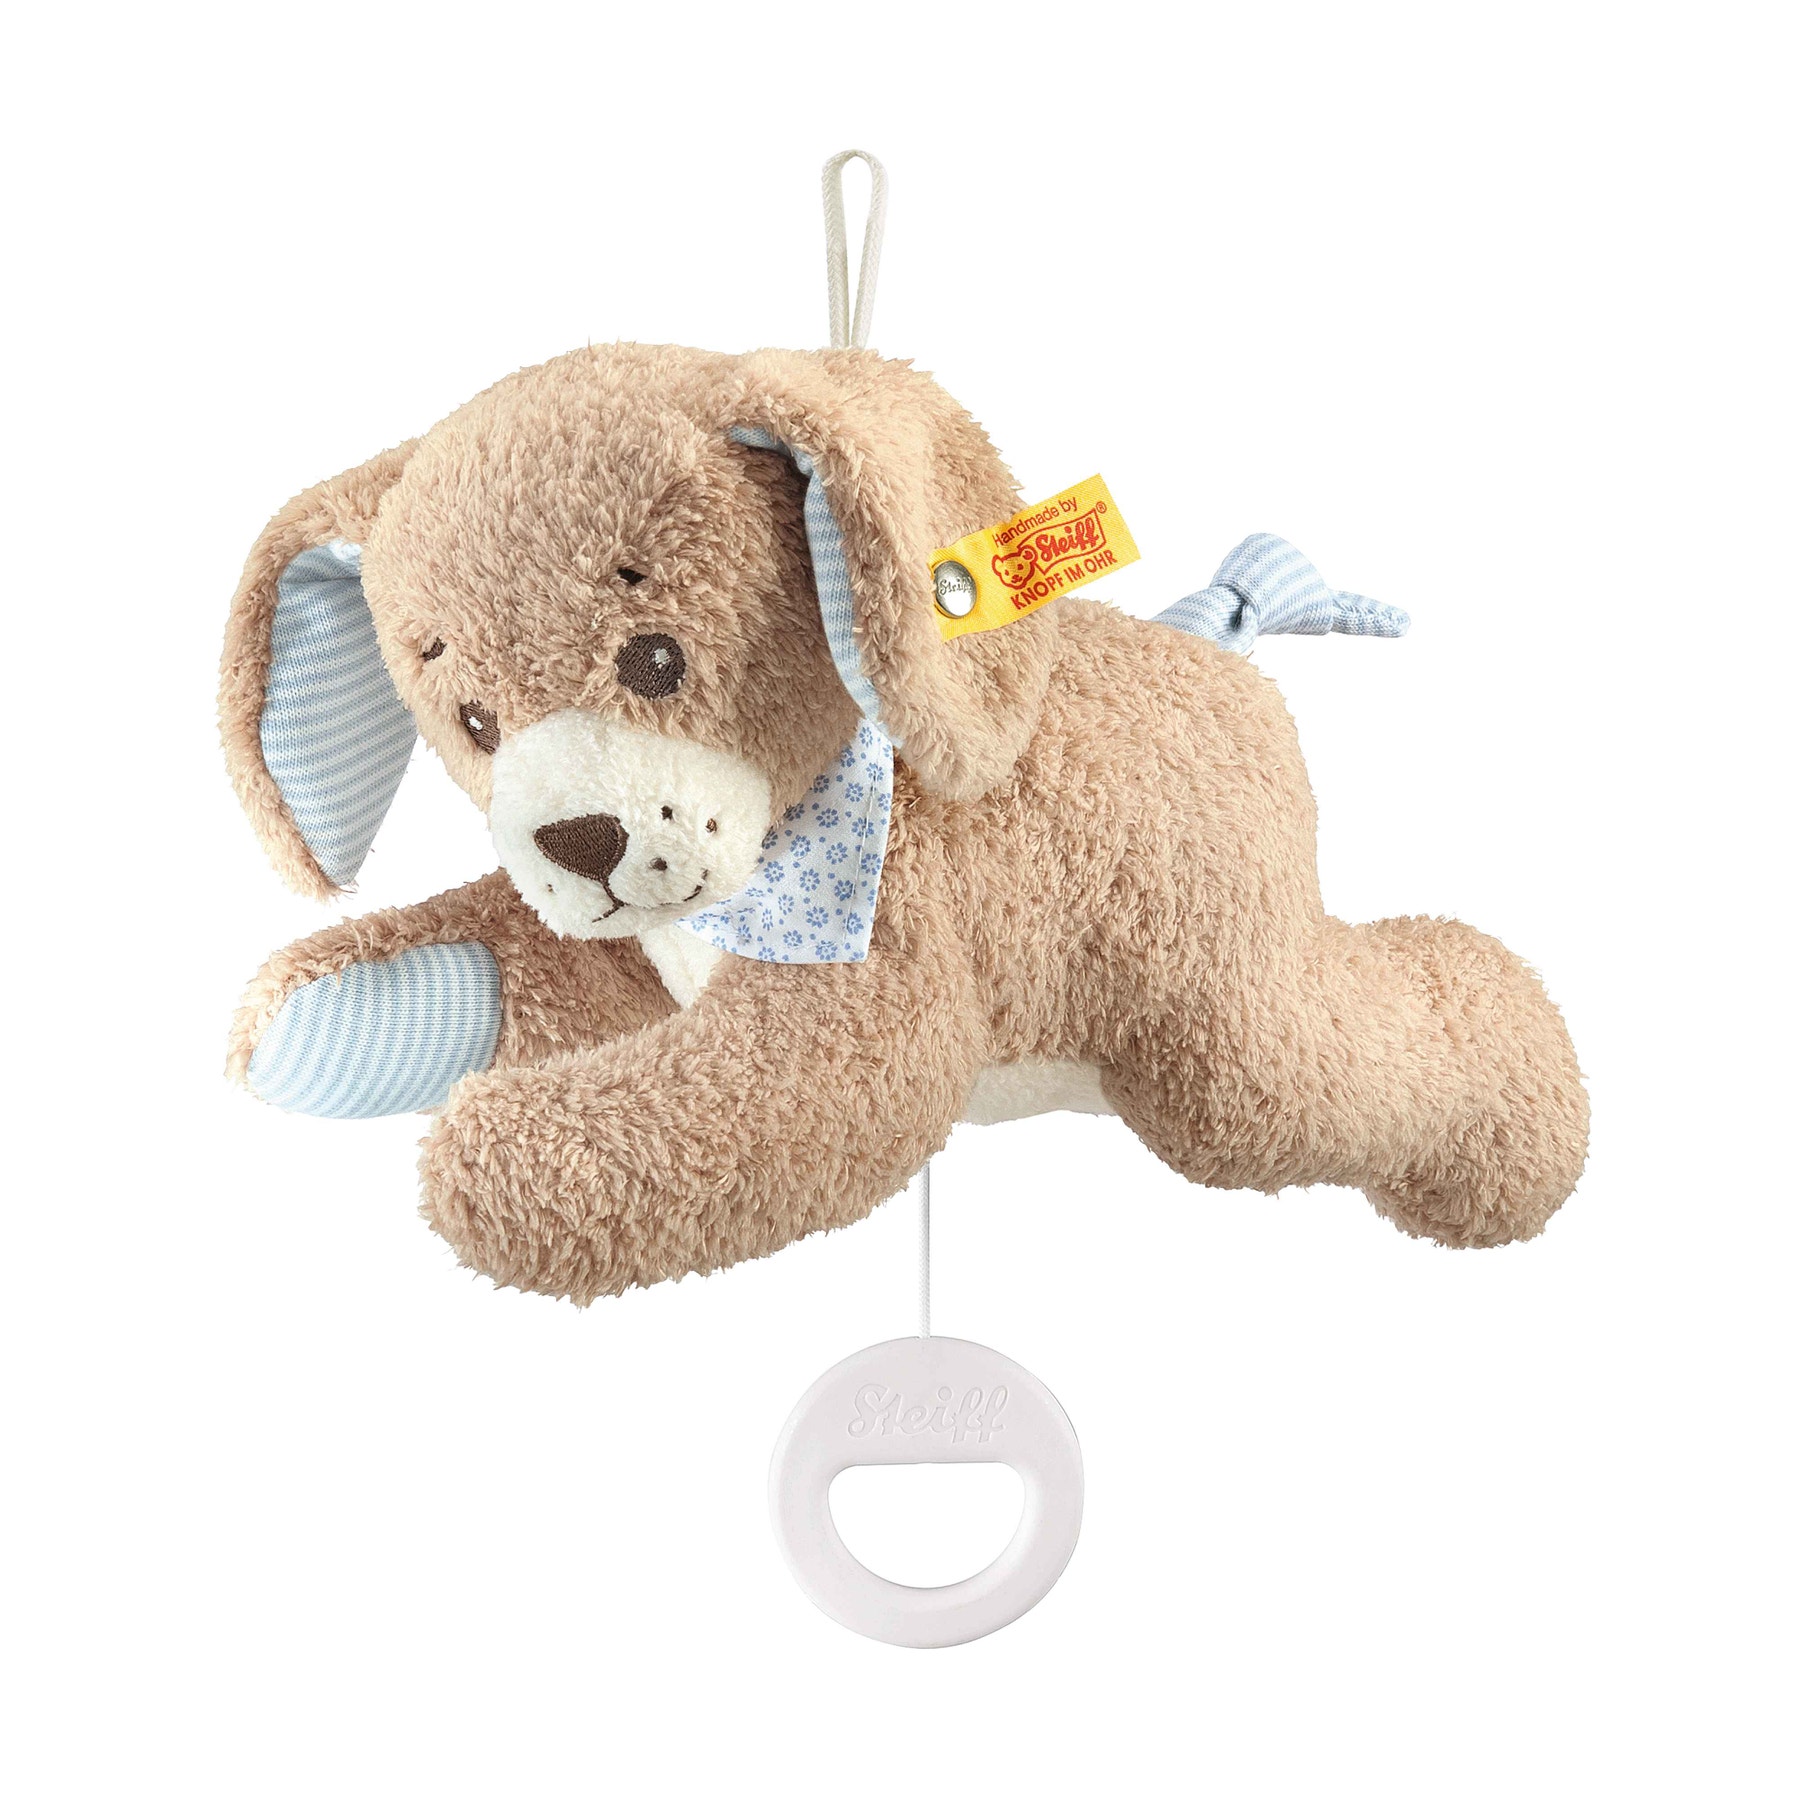 Good Night Dog Musical Pull Toy, 9 in, light blue 